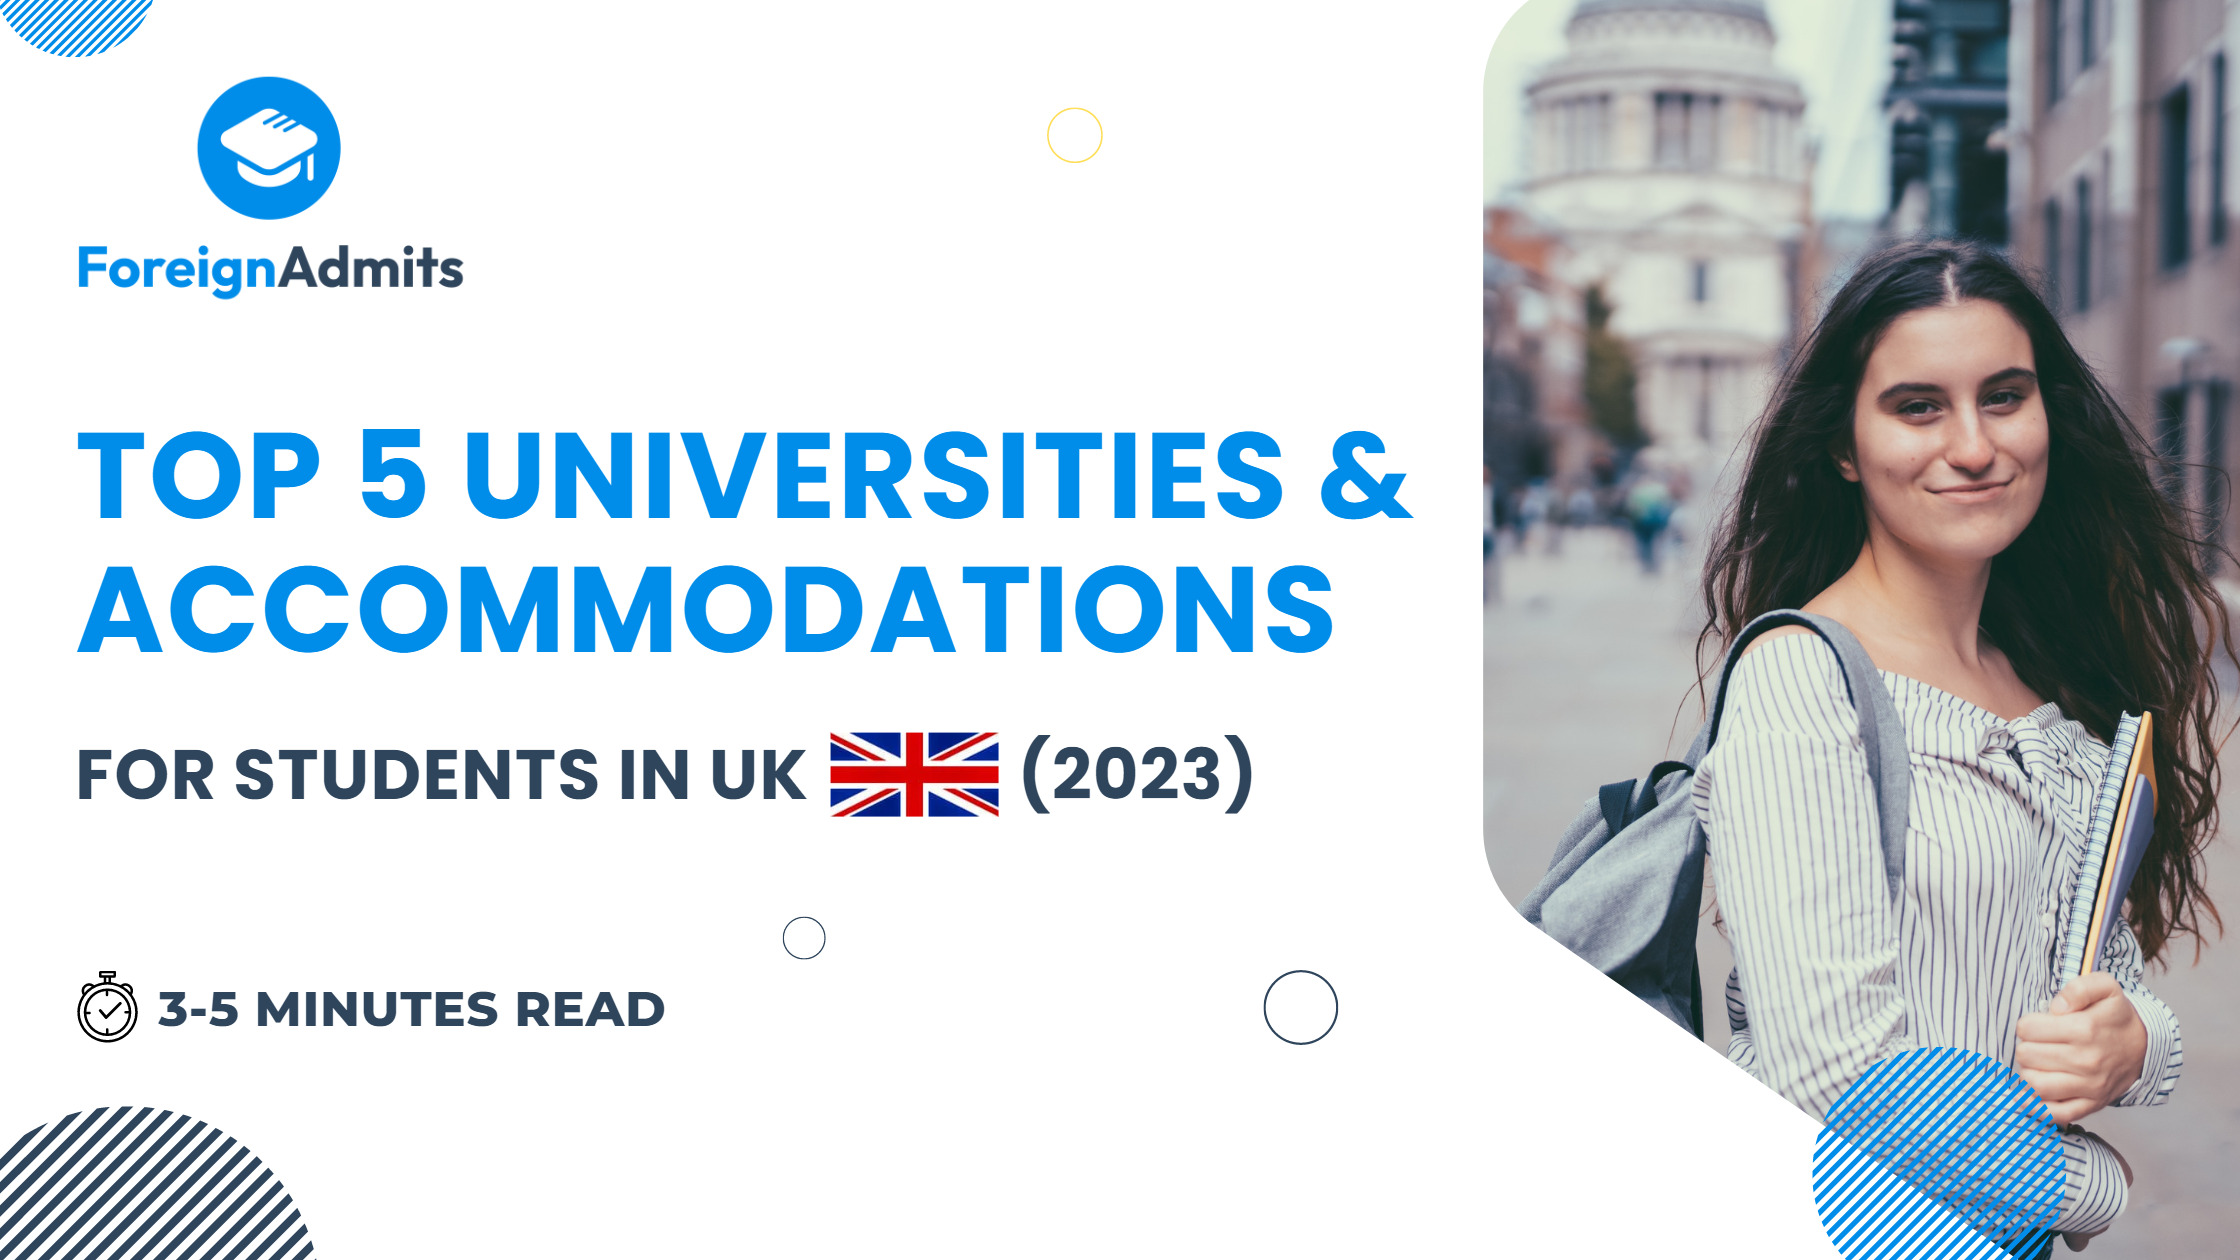 Top 5 Universities and Accommodations for Students in the UK (2023)